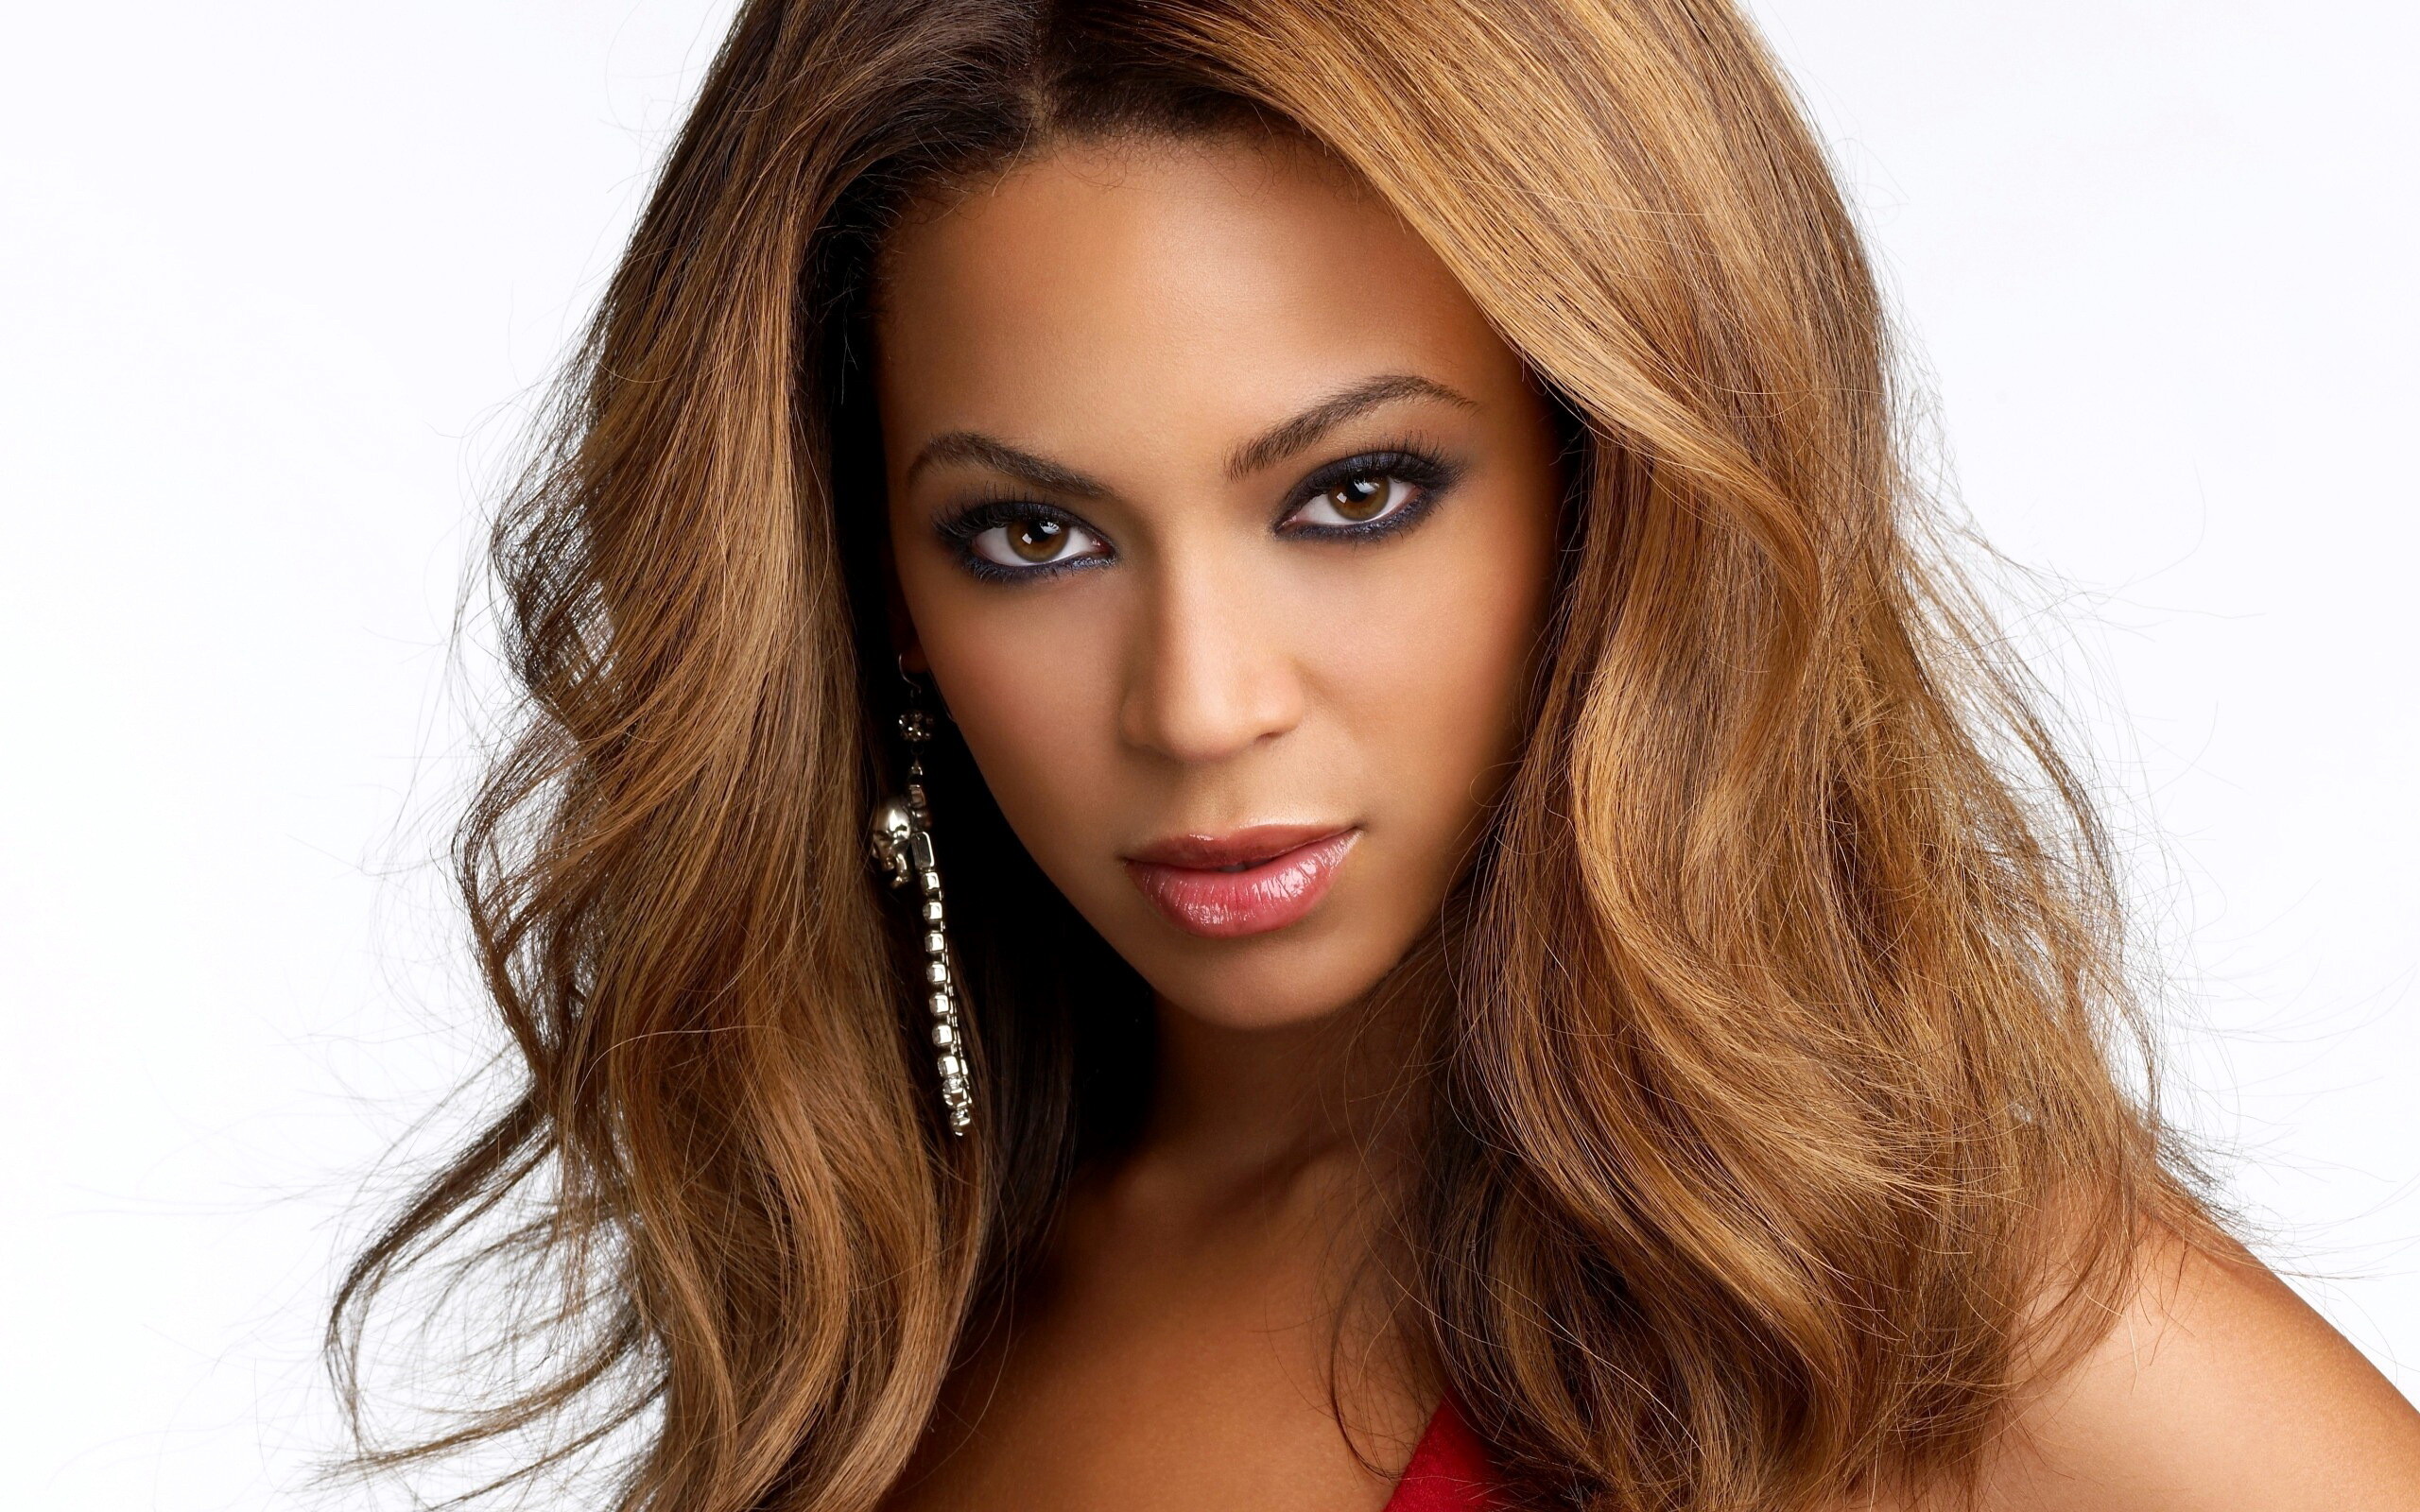 Beyonce: Seventh studio album, Renaissance, experimented with disco and house music. 2560x1600 HD Background.